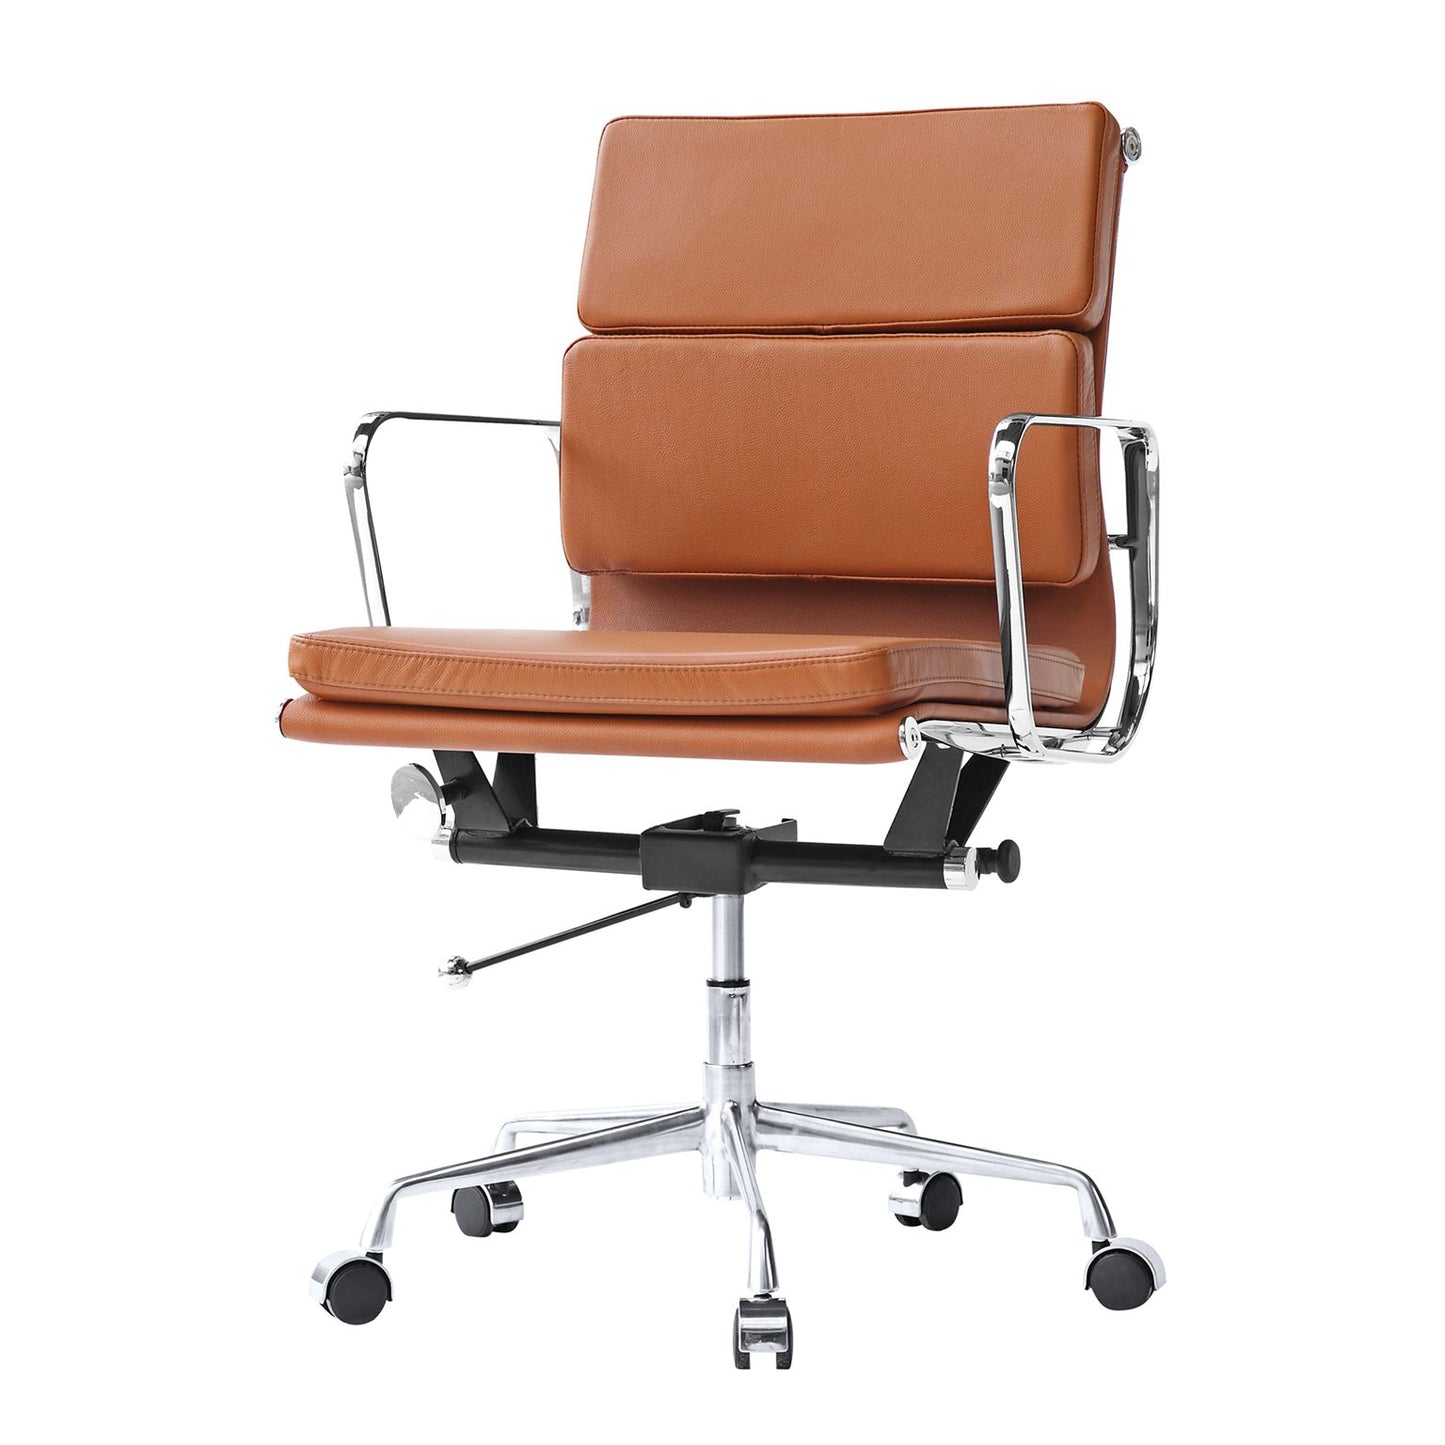 RP Eames soft pad Genuine Leather  office chair, Tan  color available now